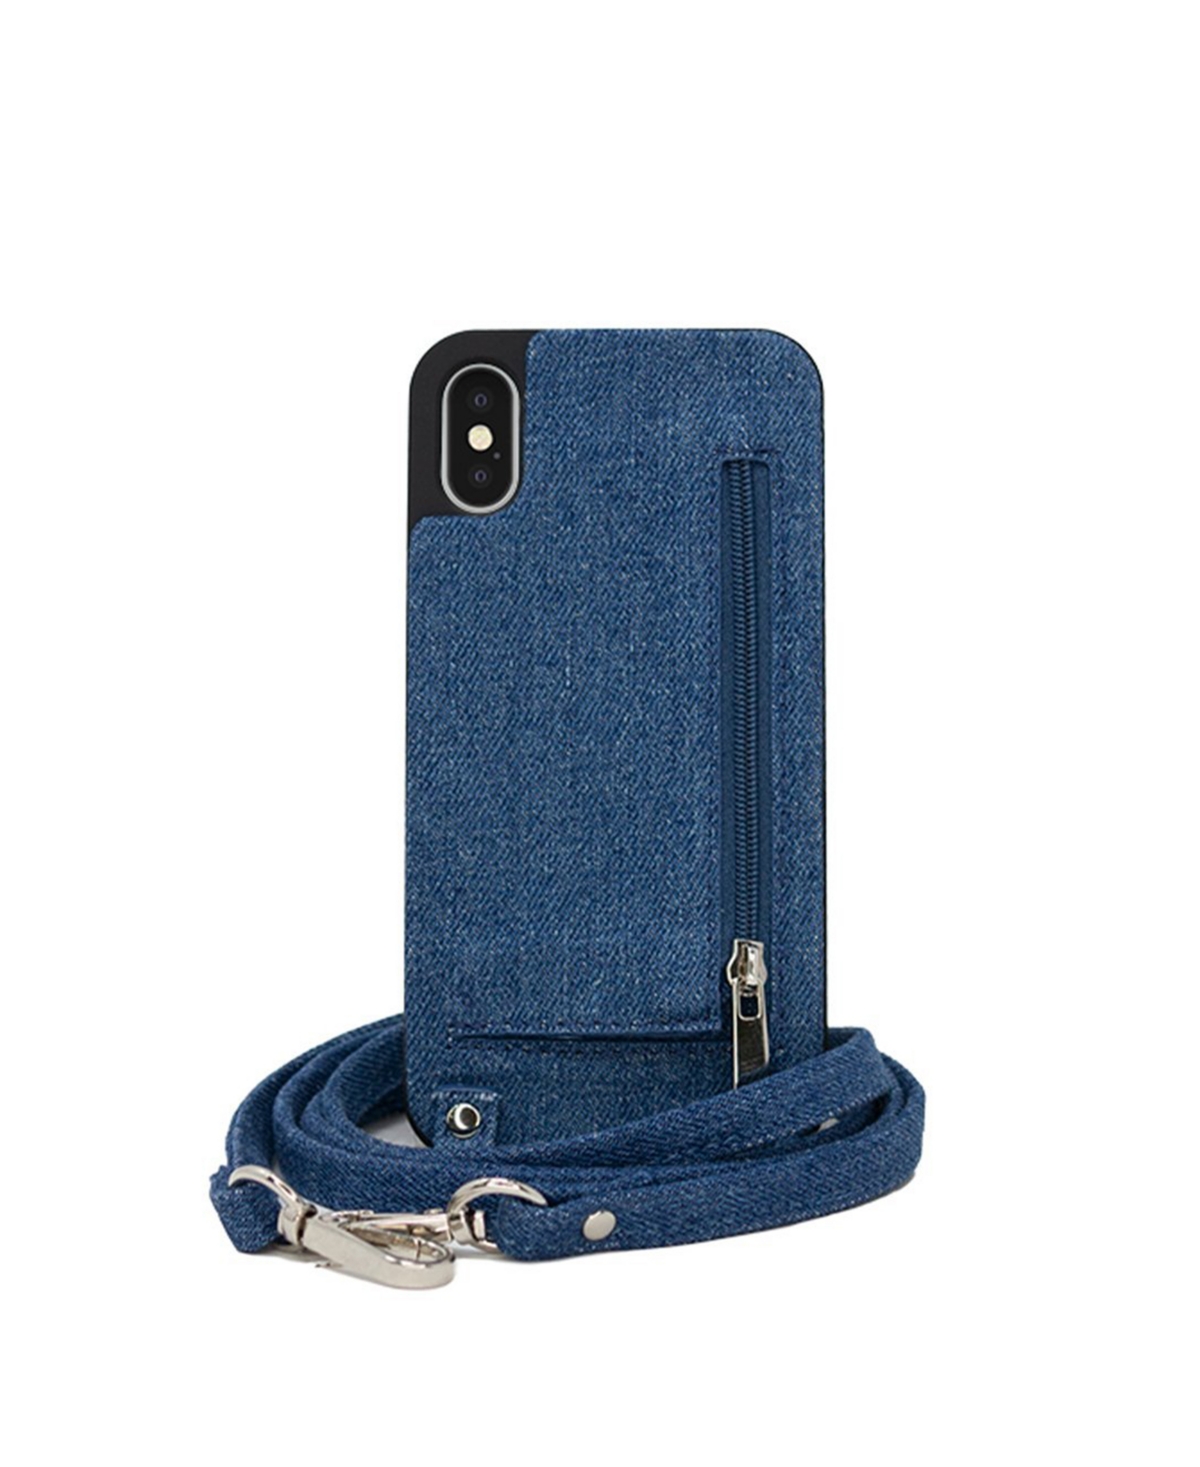 Hera Cases Crossbody X or Xs IPhone Case with Strap Wallet